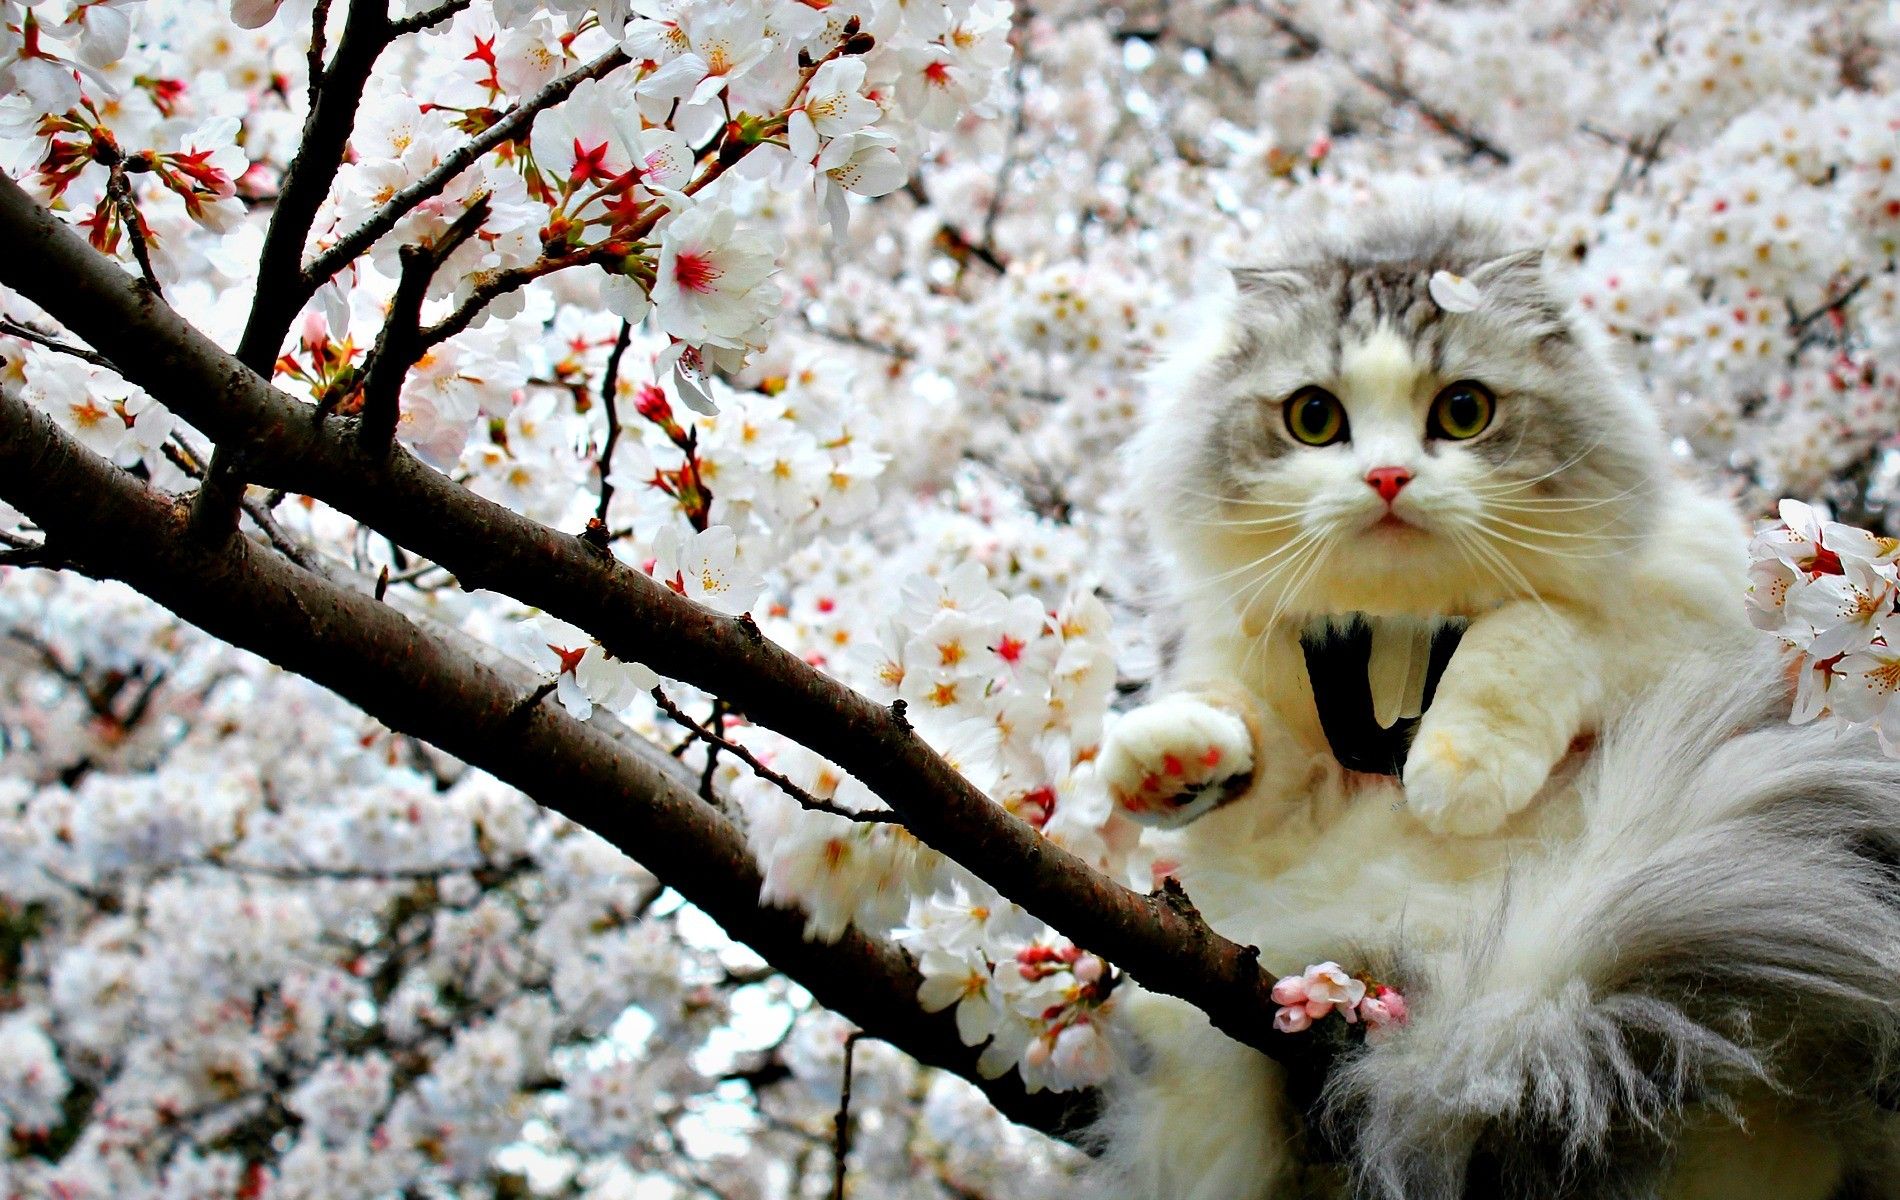 Cute Spring Animals Wallpapers - Wallpaper Cave